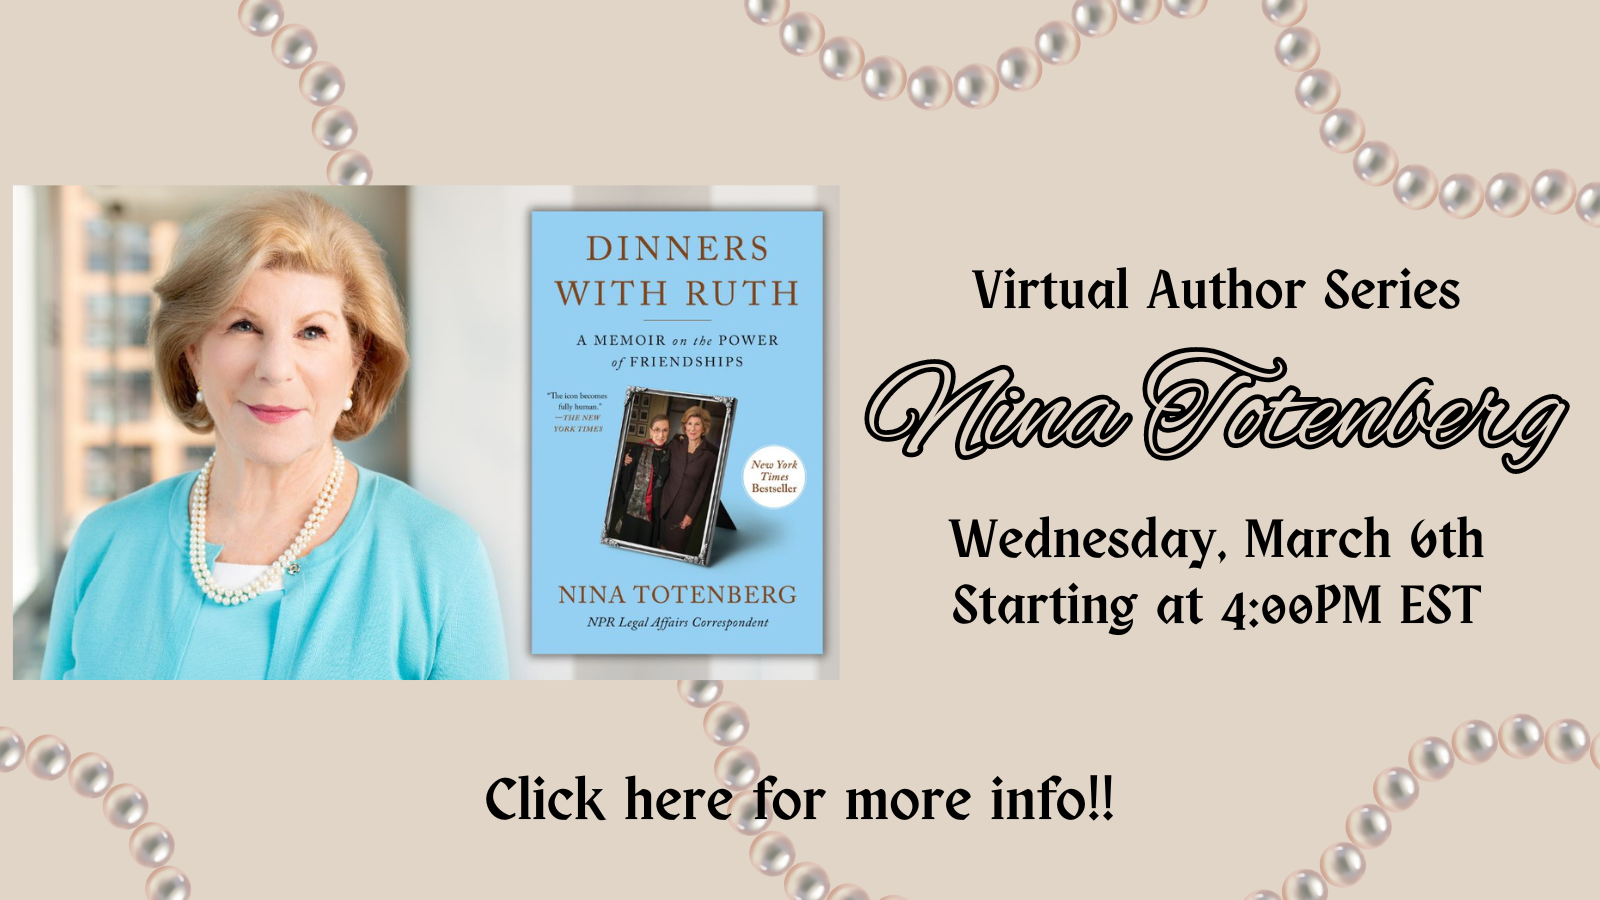 Join us for a wonderful virtual author talk!